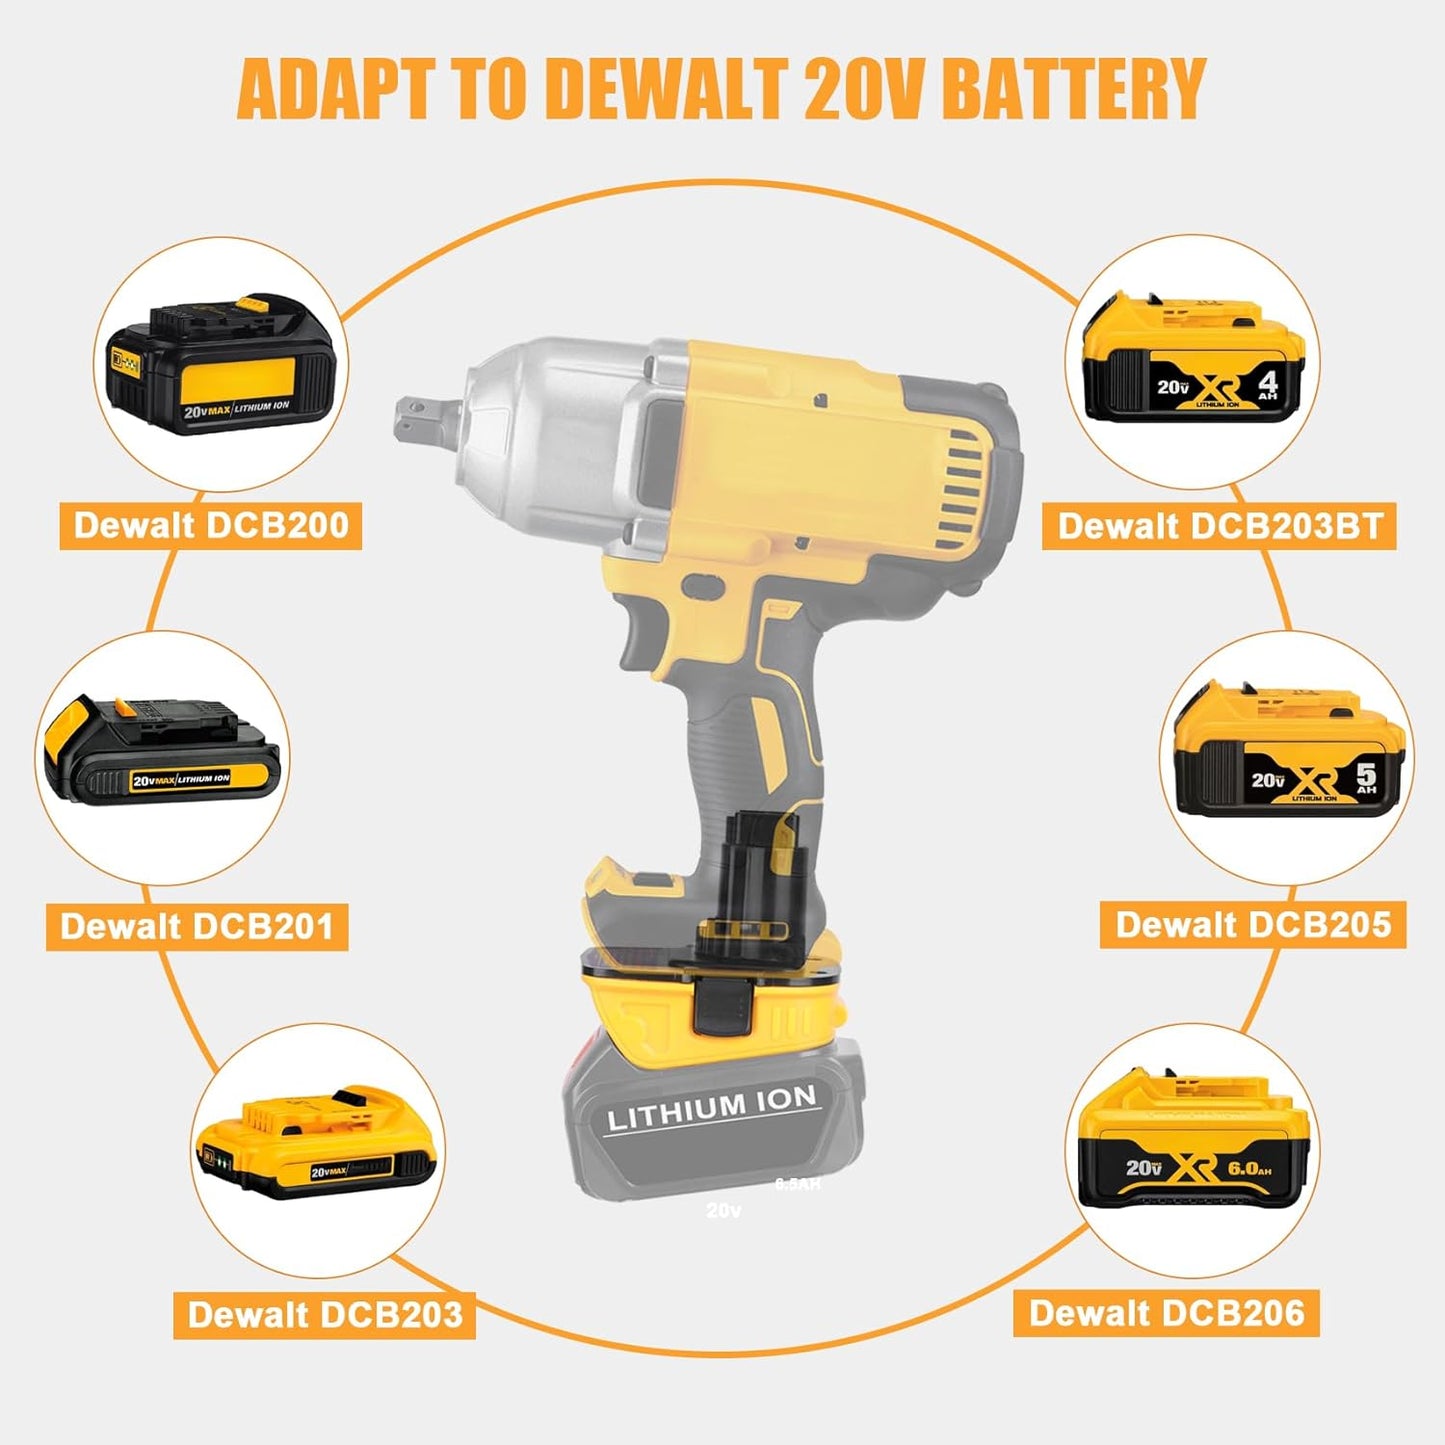 2 Packs JYJZPB 20V to 18V Adapter for DeWalt Tools Suitable for MAX XR Battery DCB200 DCB201 DCB203 DCB203BT DCB204 DCB206 with USB-A Output Port